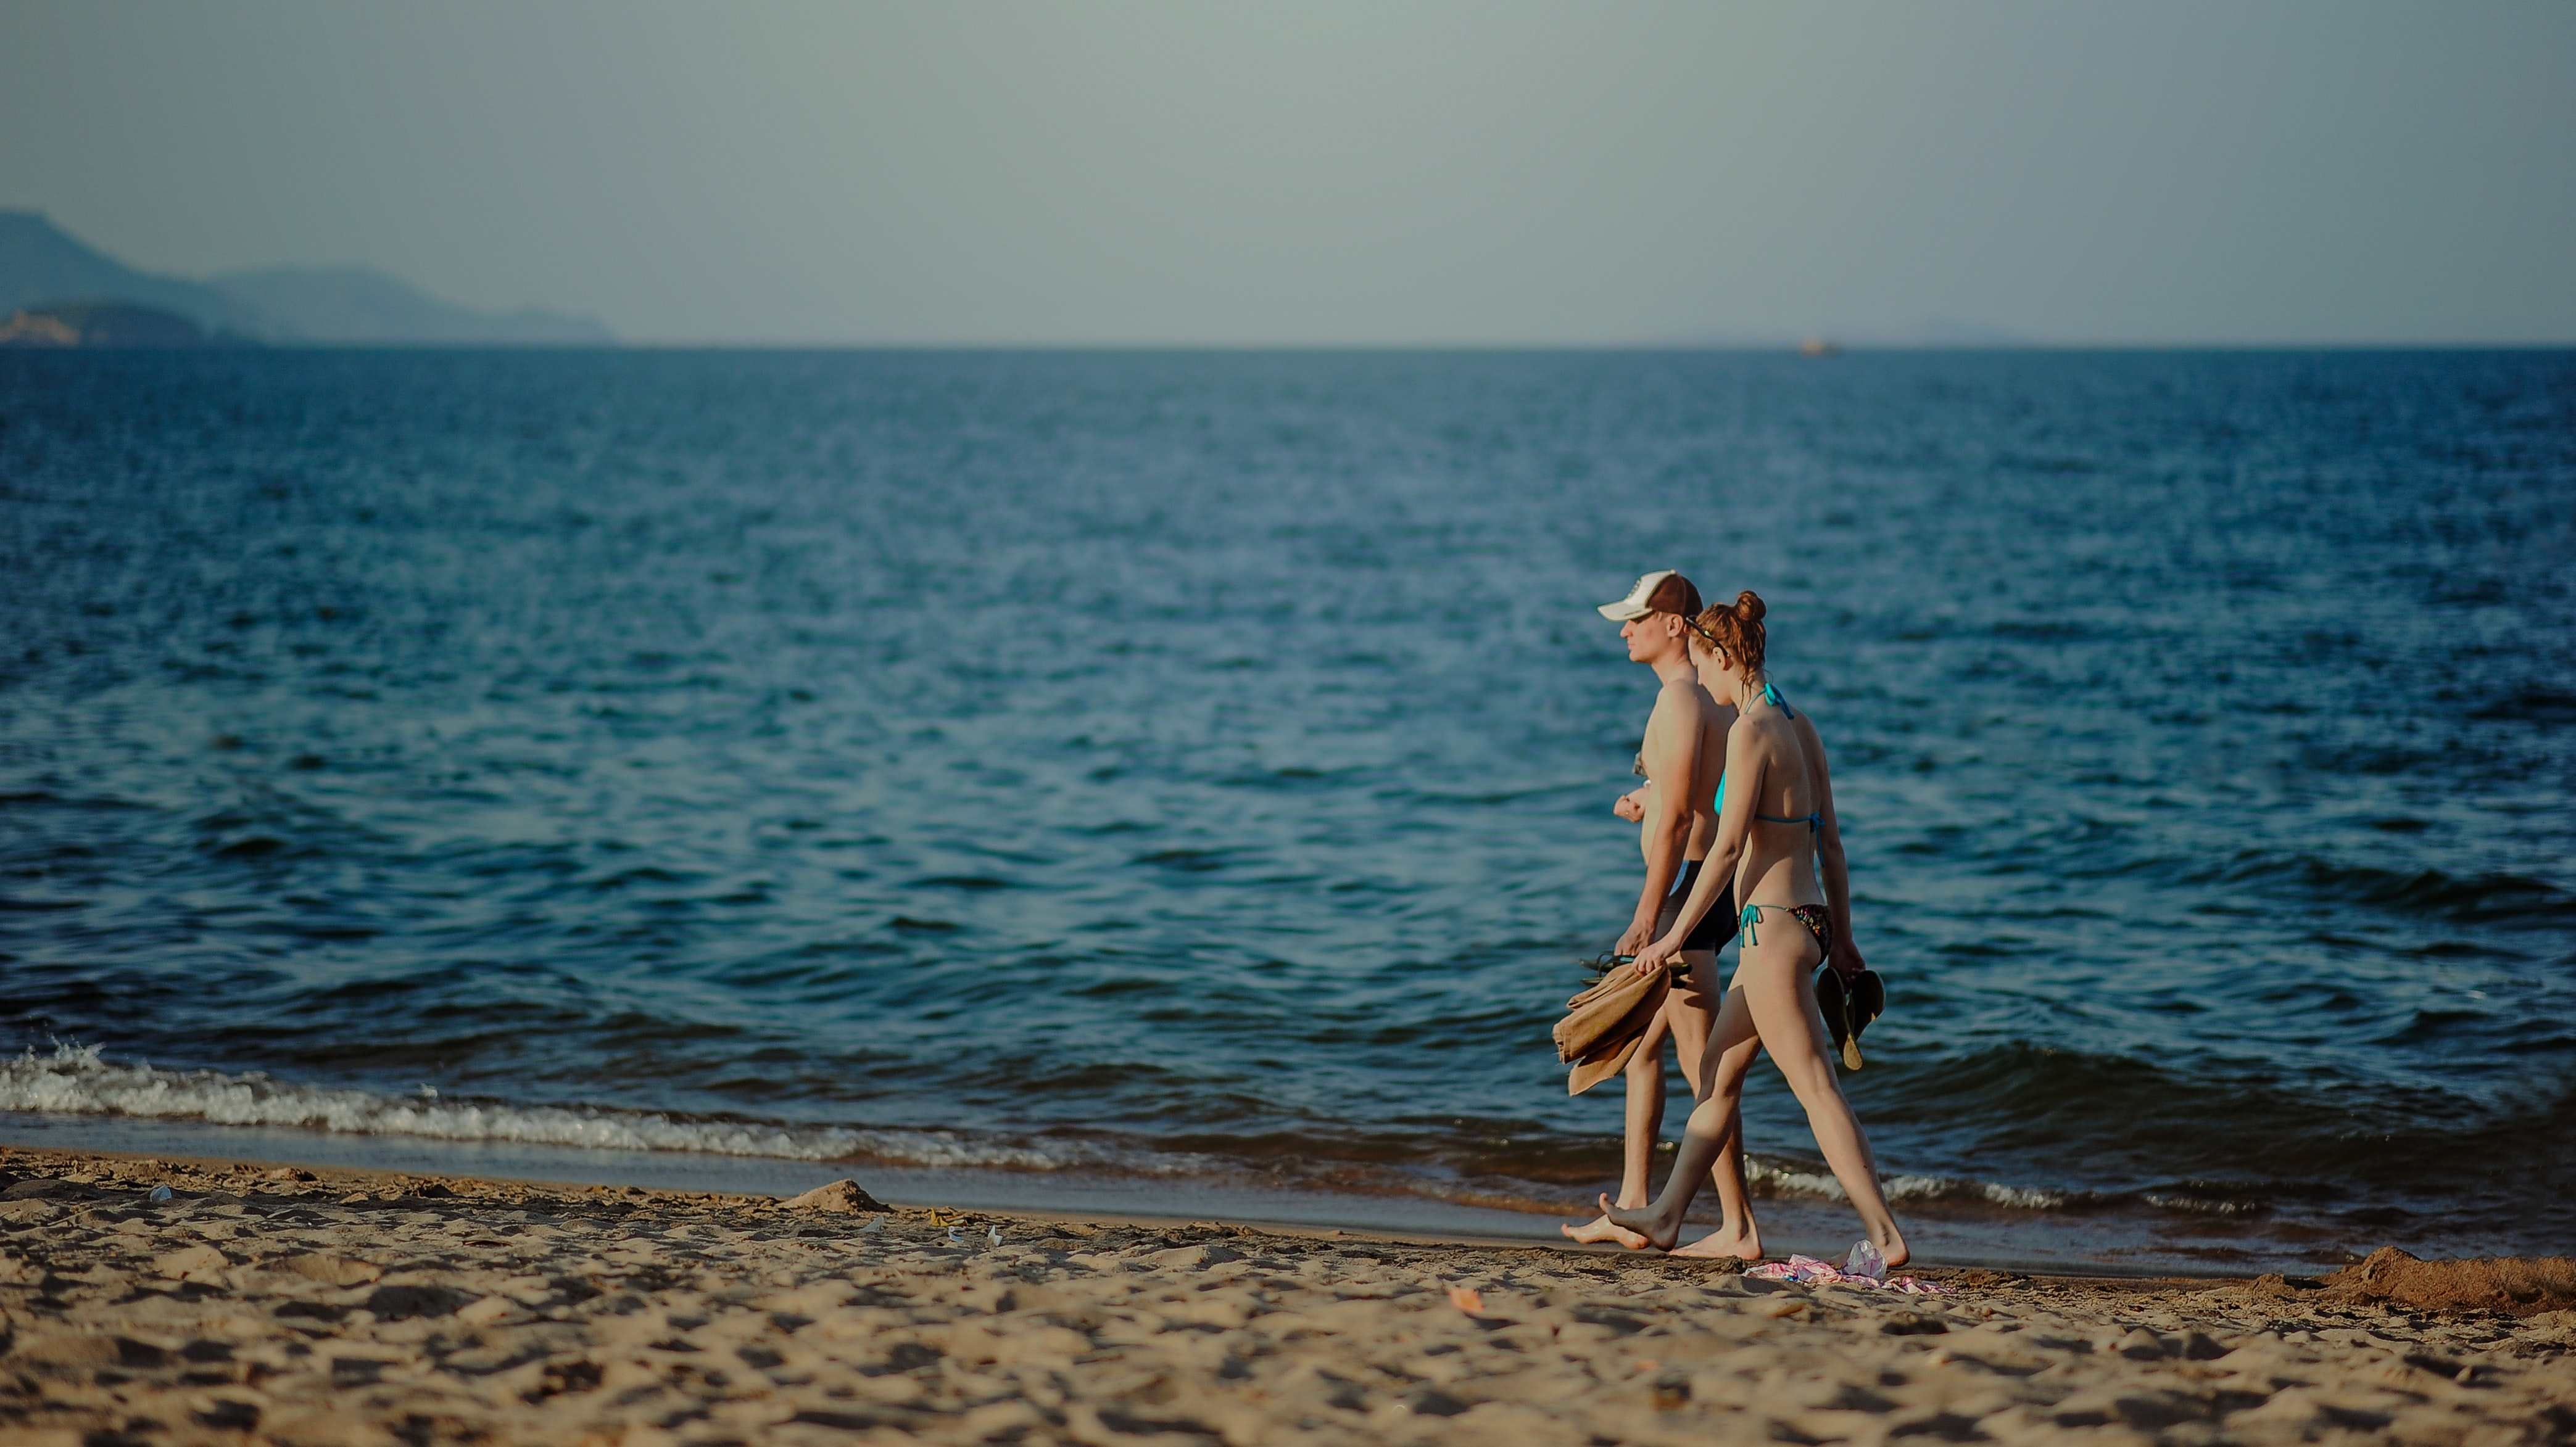 Couple walking on the beach at daytime photo